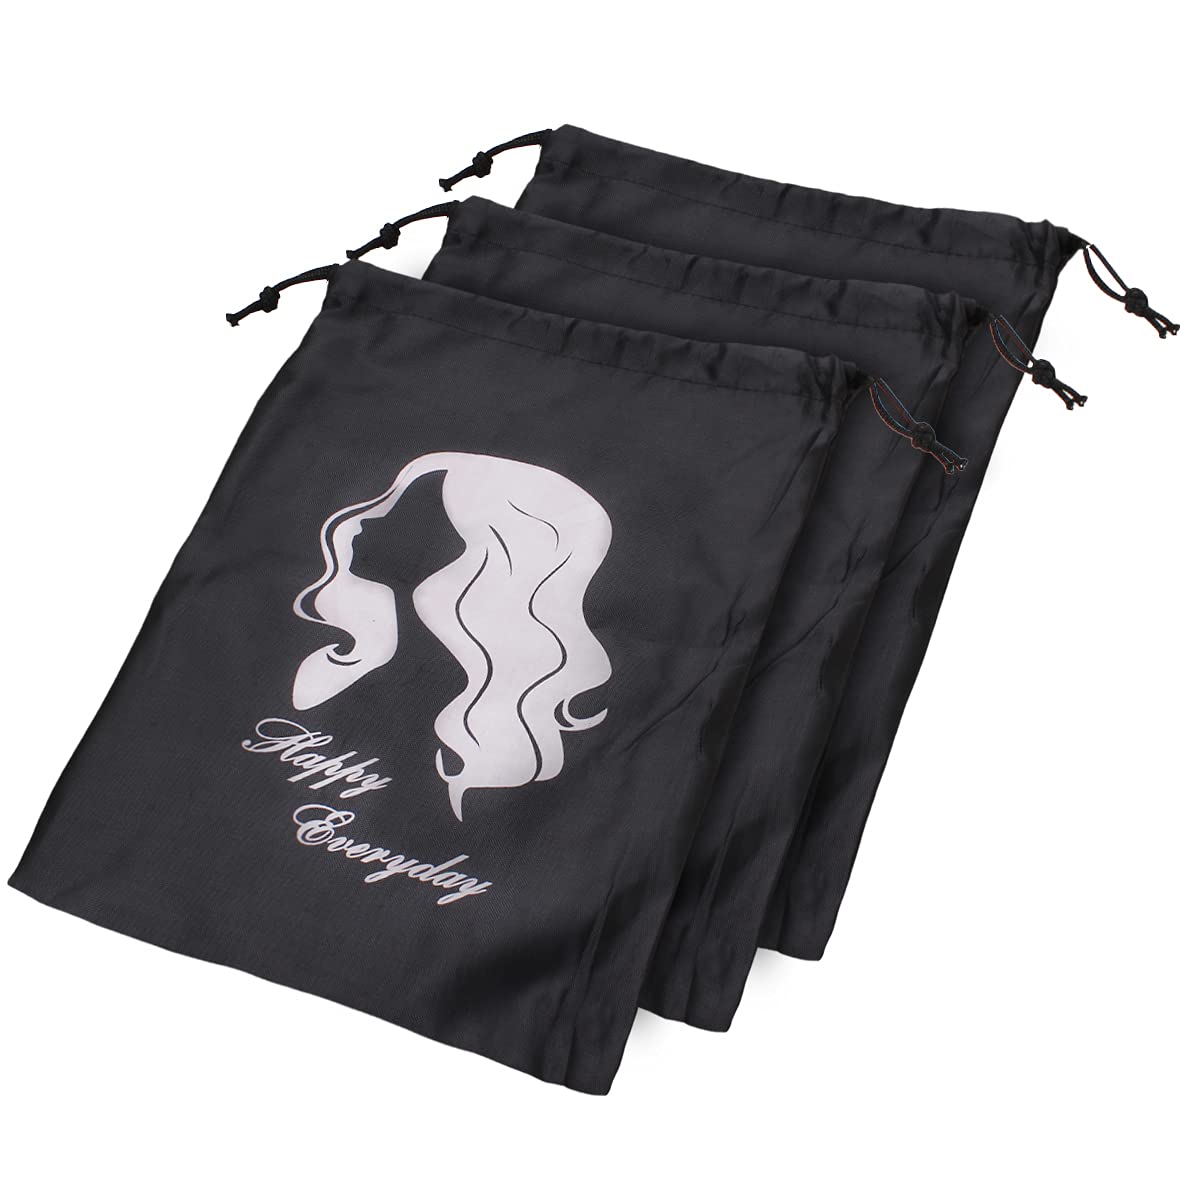 Xtrend 8 Pieces Wig Bags Satin Packaging Pouches Carrying Storage Bags with Drawstring for Wigs, Bundles,Hair Extensions,Tools, Business Gift Bags